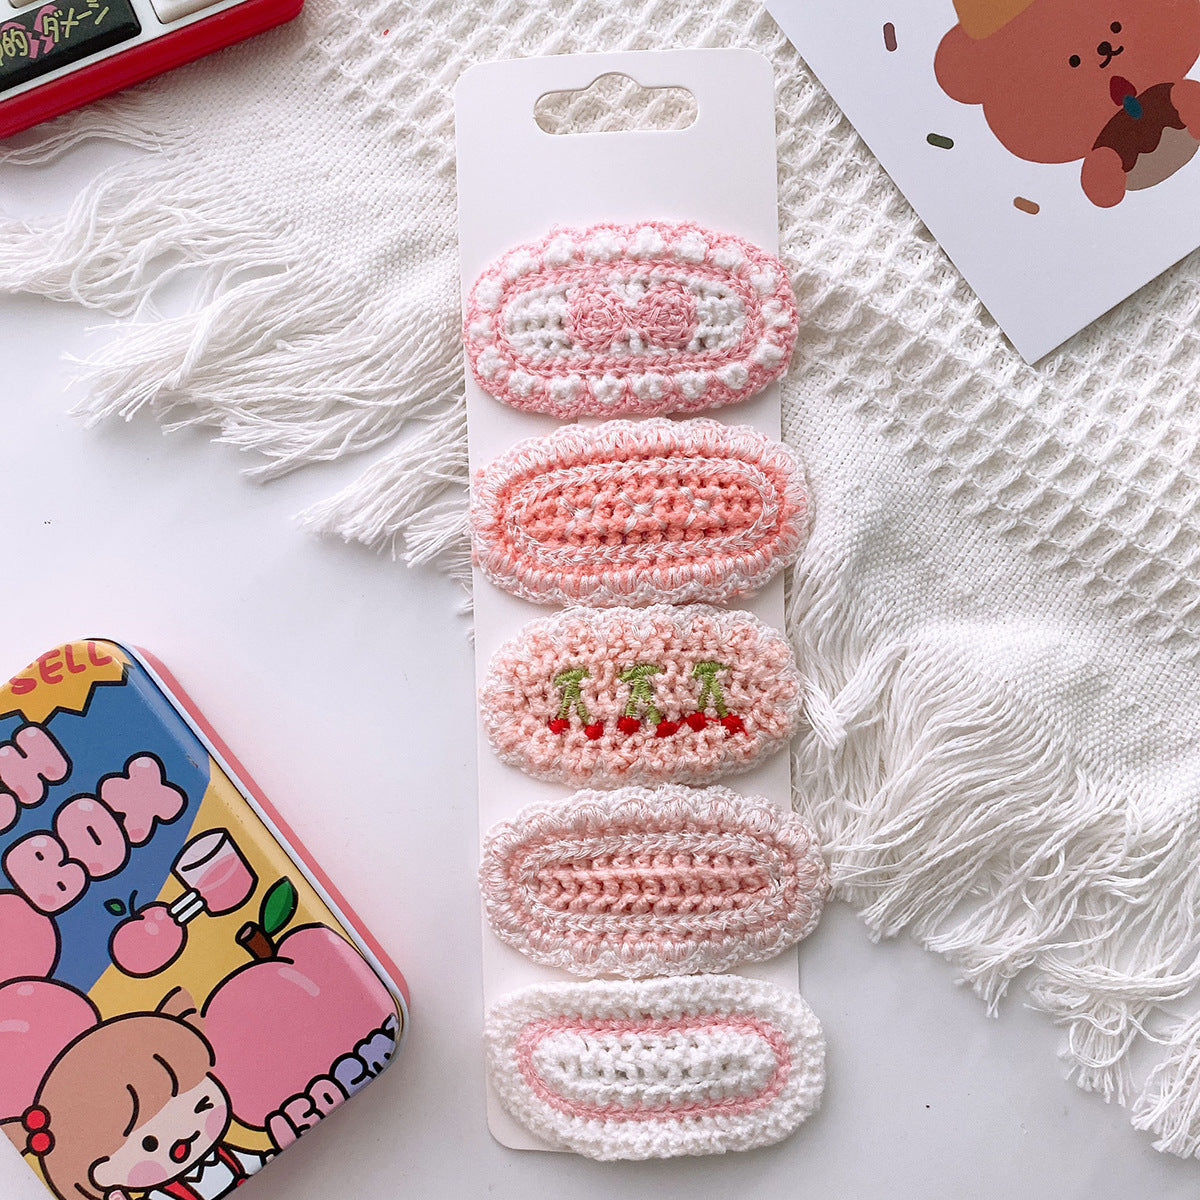 Korean-Style Versatile Knit Hair Clip With Sweet Floral Design For Girly Charm 5-Piece Set